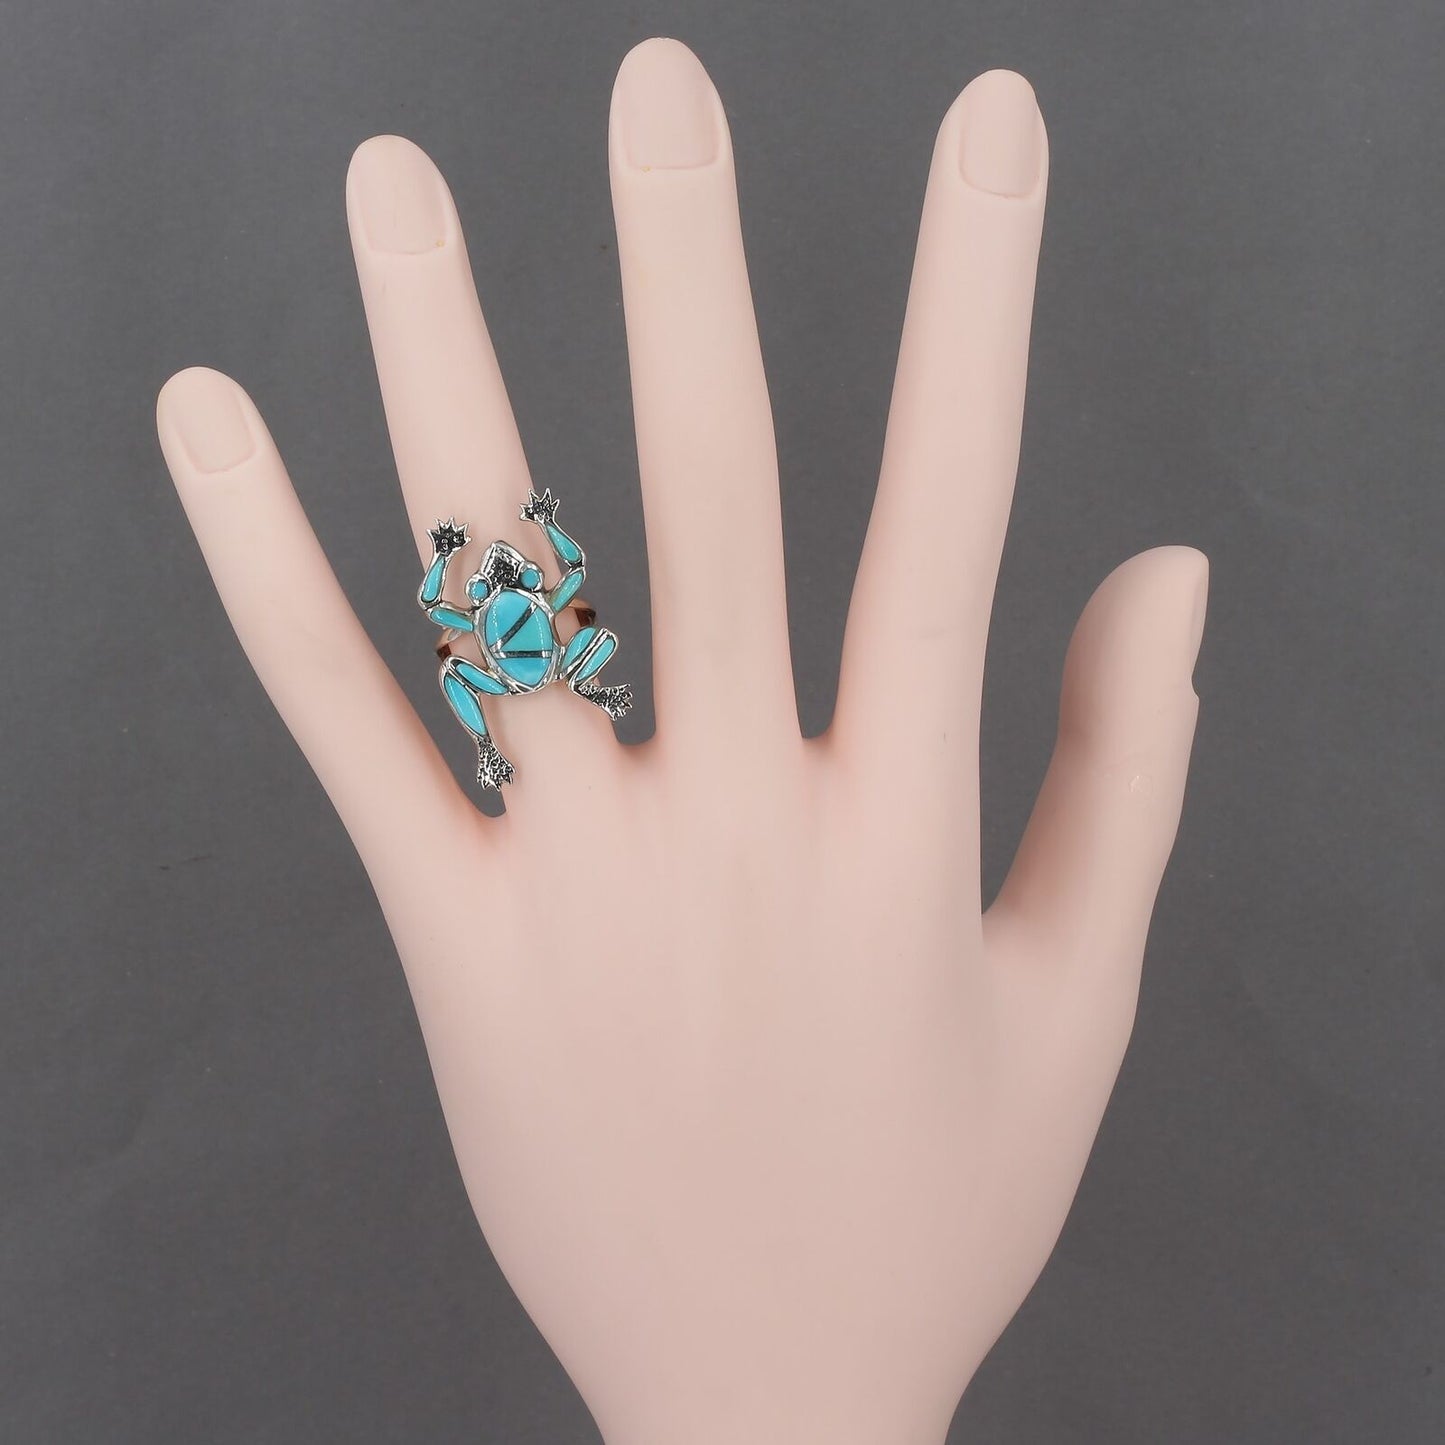 Signed Philipines Handcrafted Sterling Silver Turquoise Inlay Frog Ring Size 6